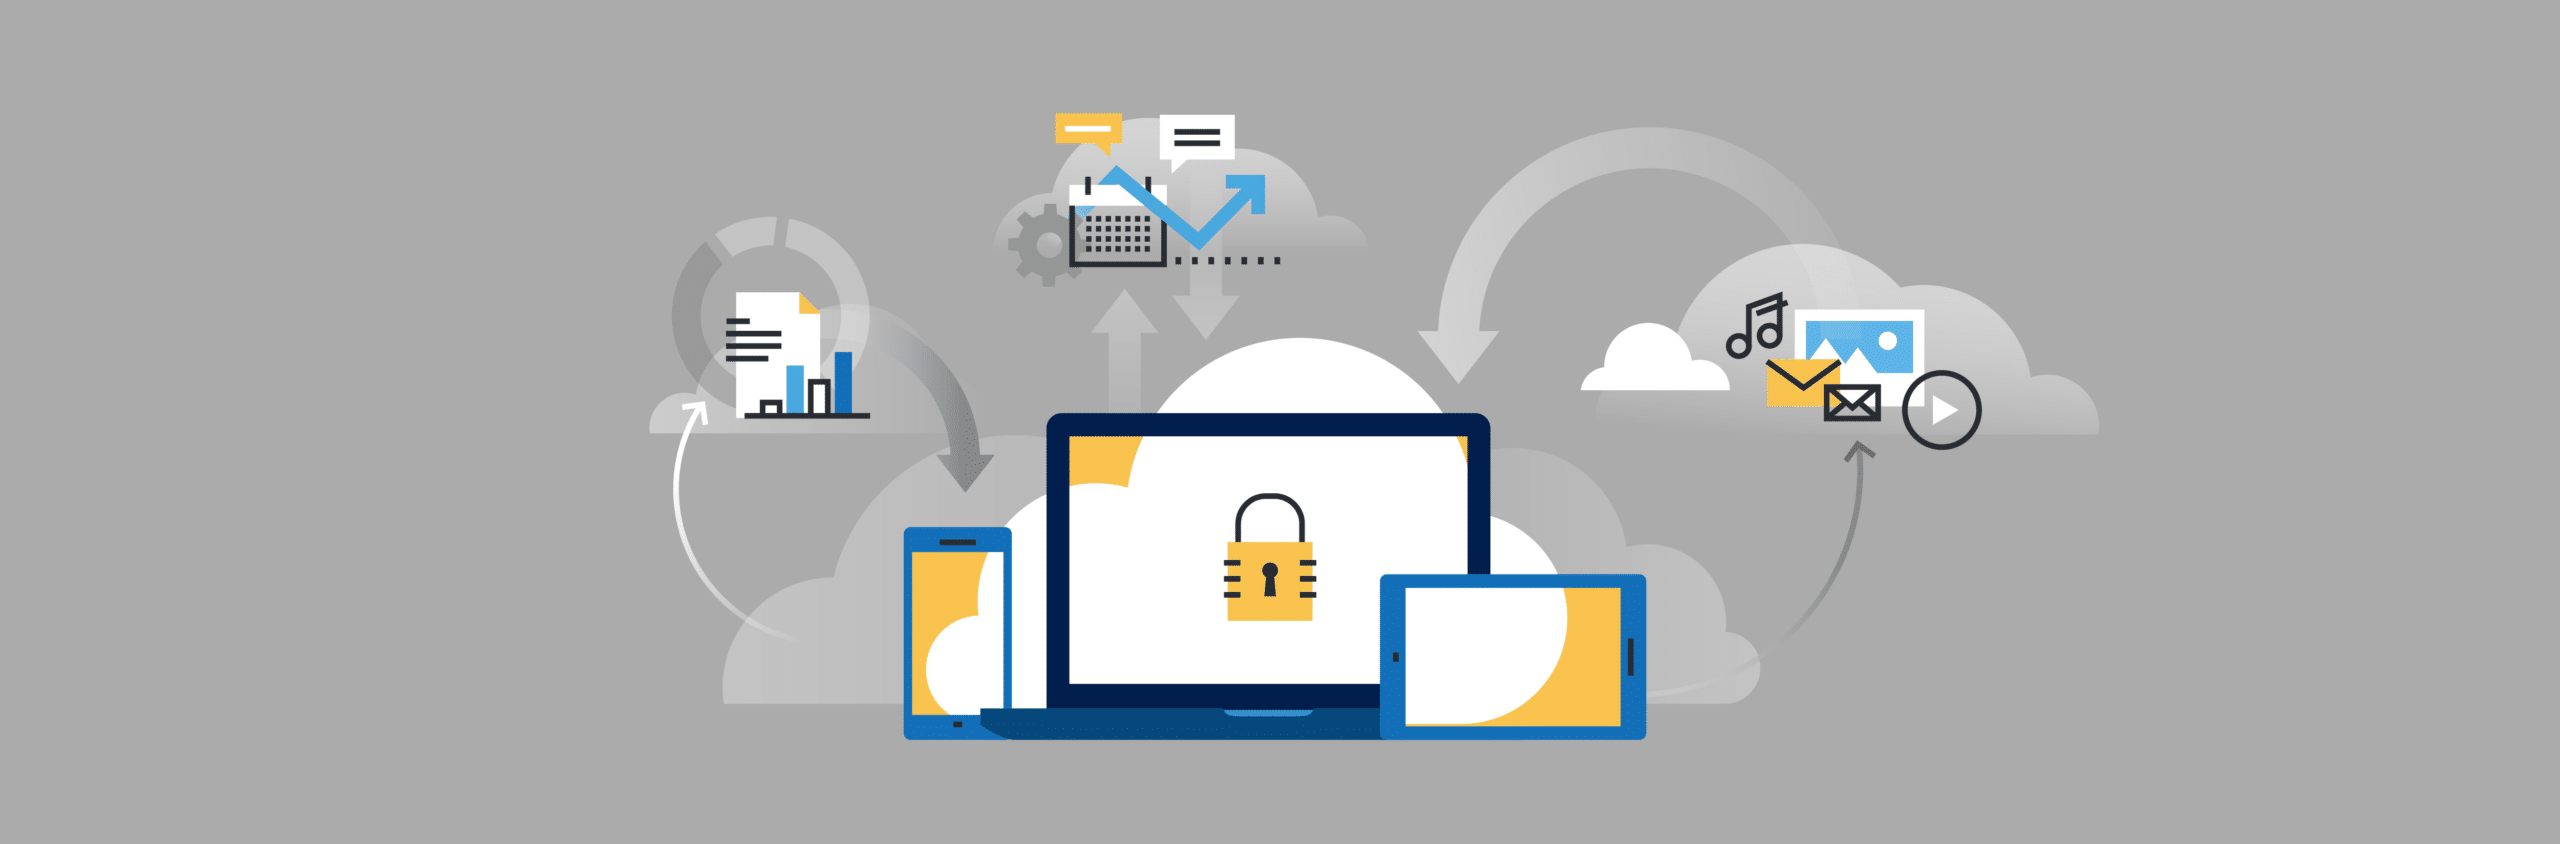 Lawyer Cloud Security